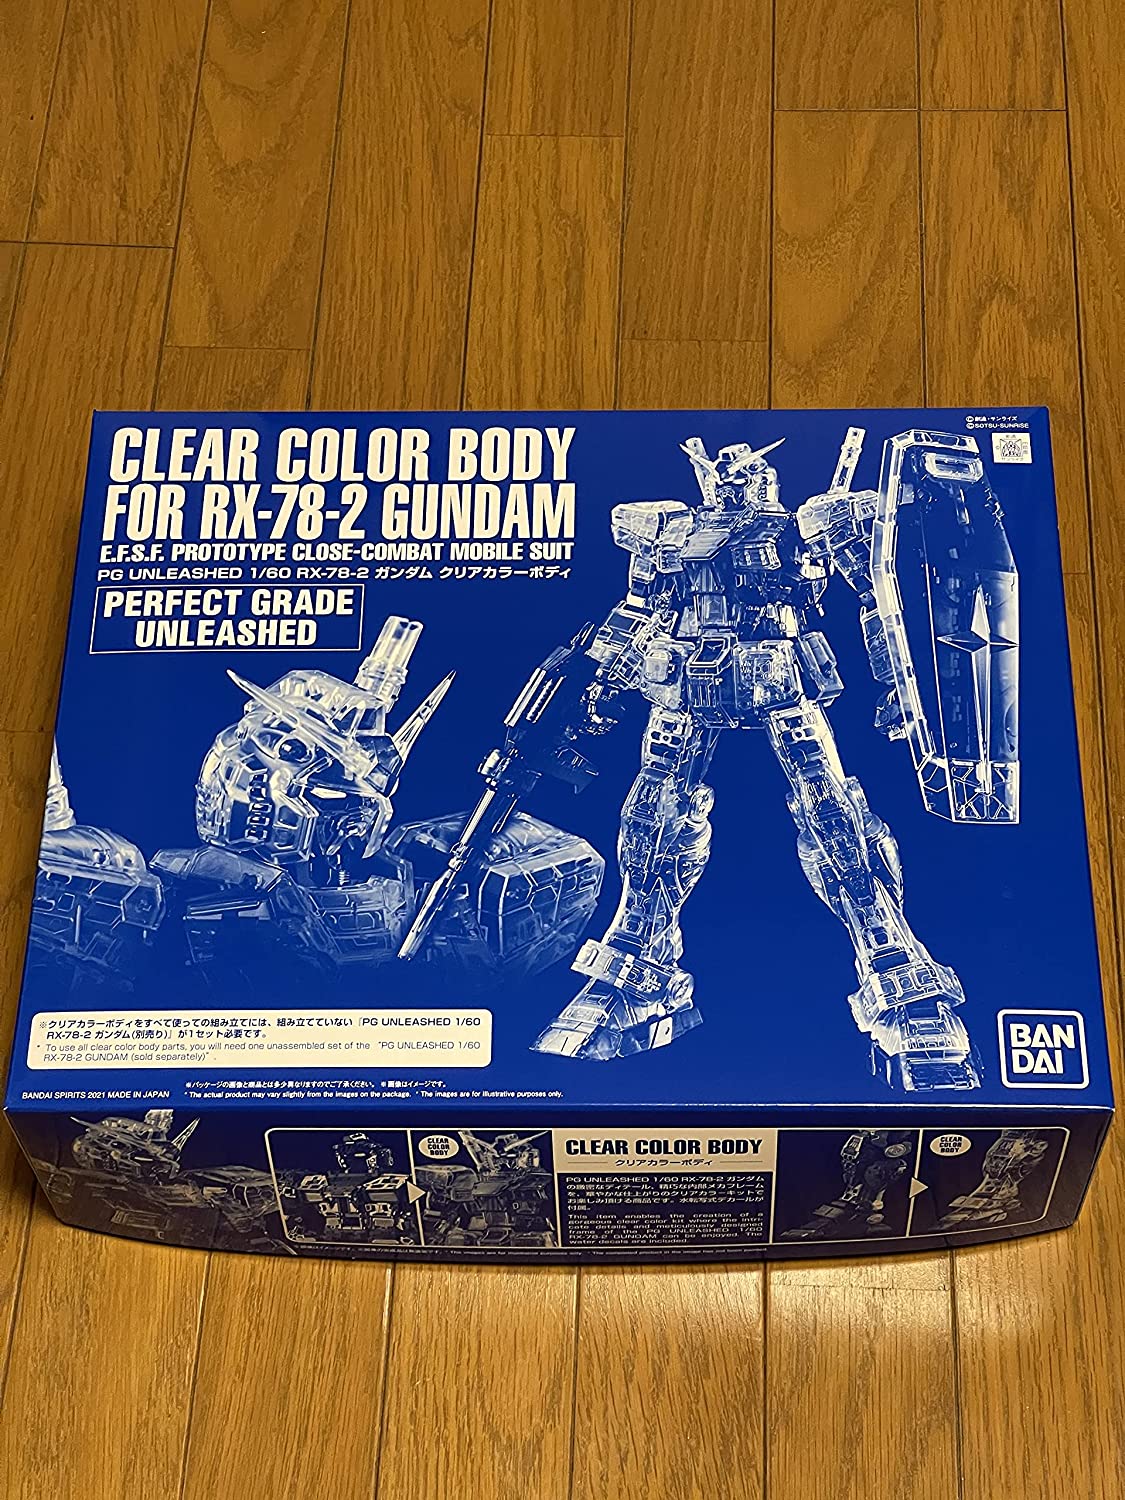 Pg Unleashed 1 60 Rx 78 2 Gundam Clear Color Body Discovery Japan Mall